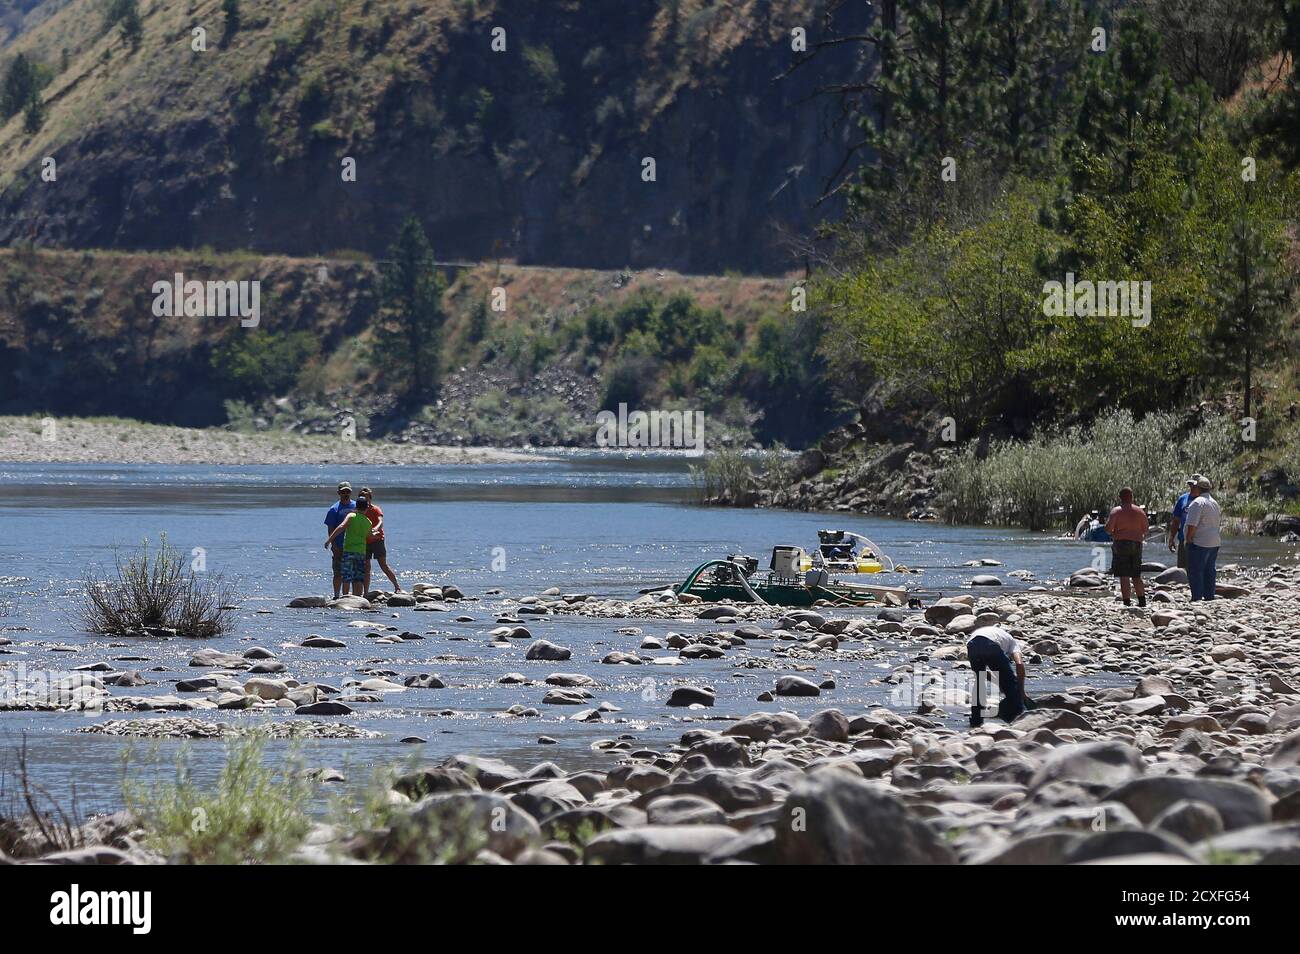 Miners mine for gold along the Salmon River near Riggins, Idaho July 3, 2014. Citing states' rights, miners were using portable pumps and hoses to collect gravel and sand from the streambed of a stretch of the federally protected Salmon River, which is closed to suction dredging and other mining by the U.S. Environmental Protection Agency to protect imperiled fish.  REUTERS/Jim Urquhart  (UNITED STATES - Tags: POLITICS ENVIRONMENT BUSINESS COMMODITIES CIVIL UNREST) Stock Photo